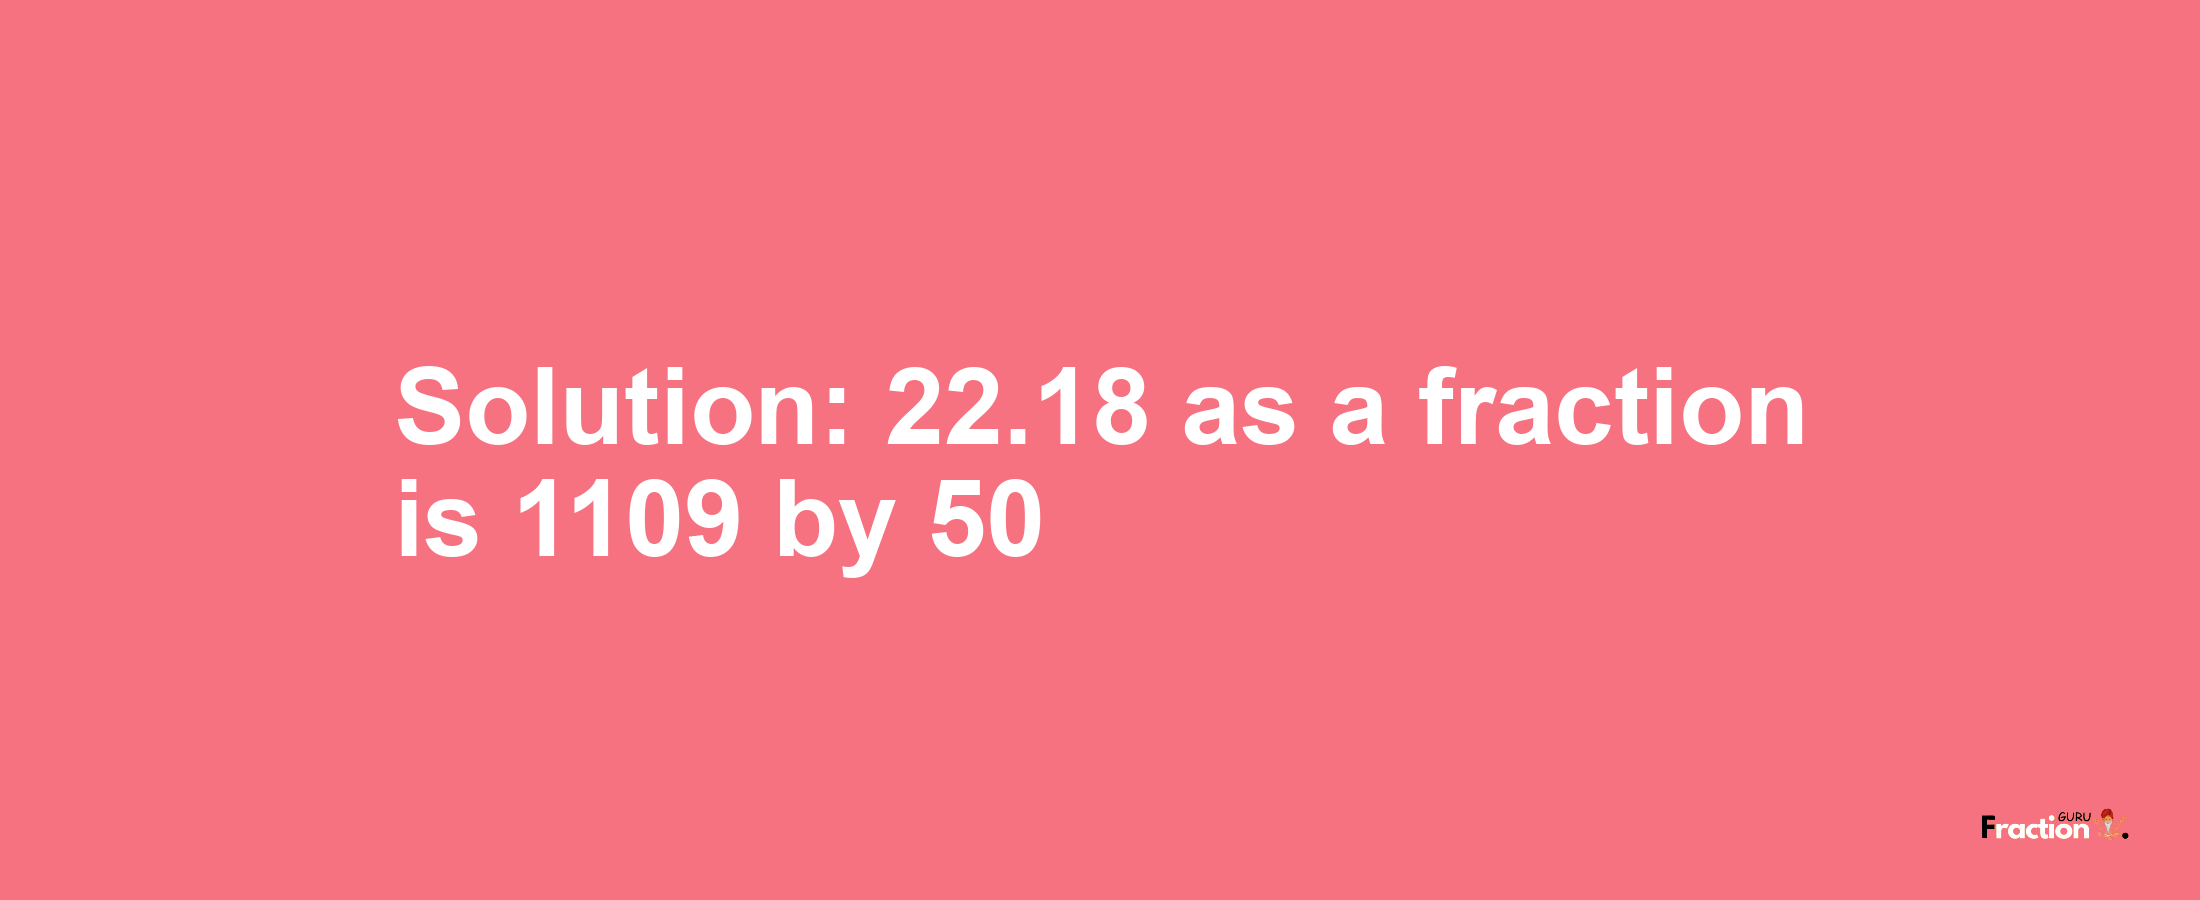 Solution:22.18 as a fraction is 1109/50